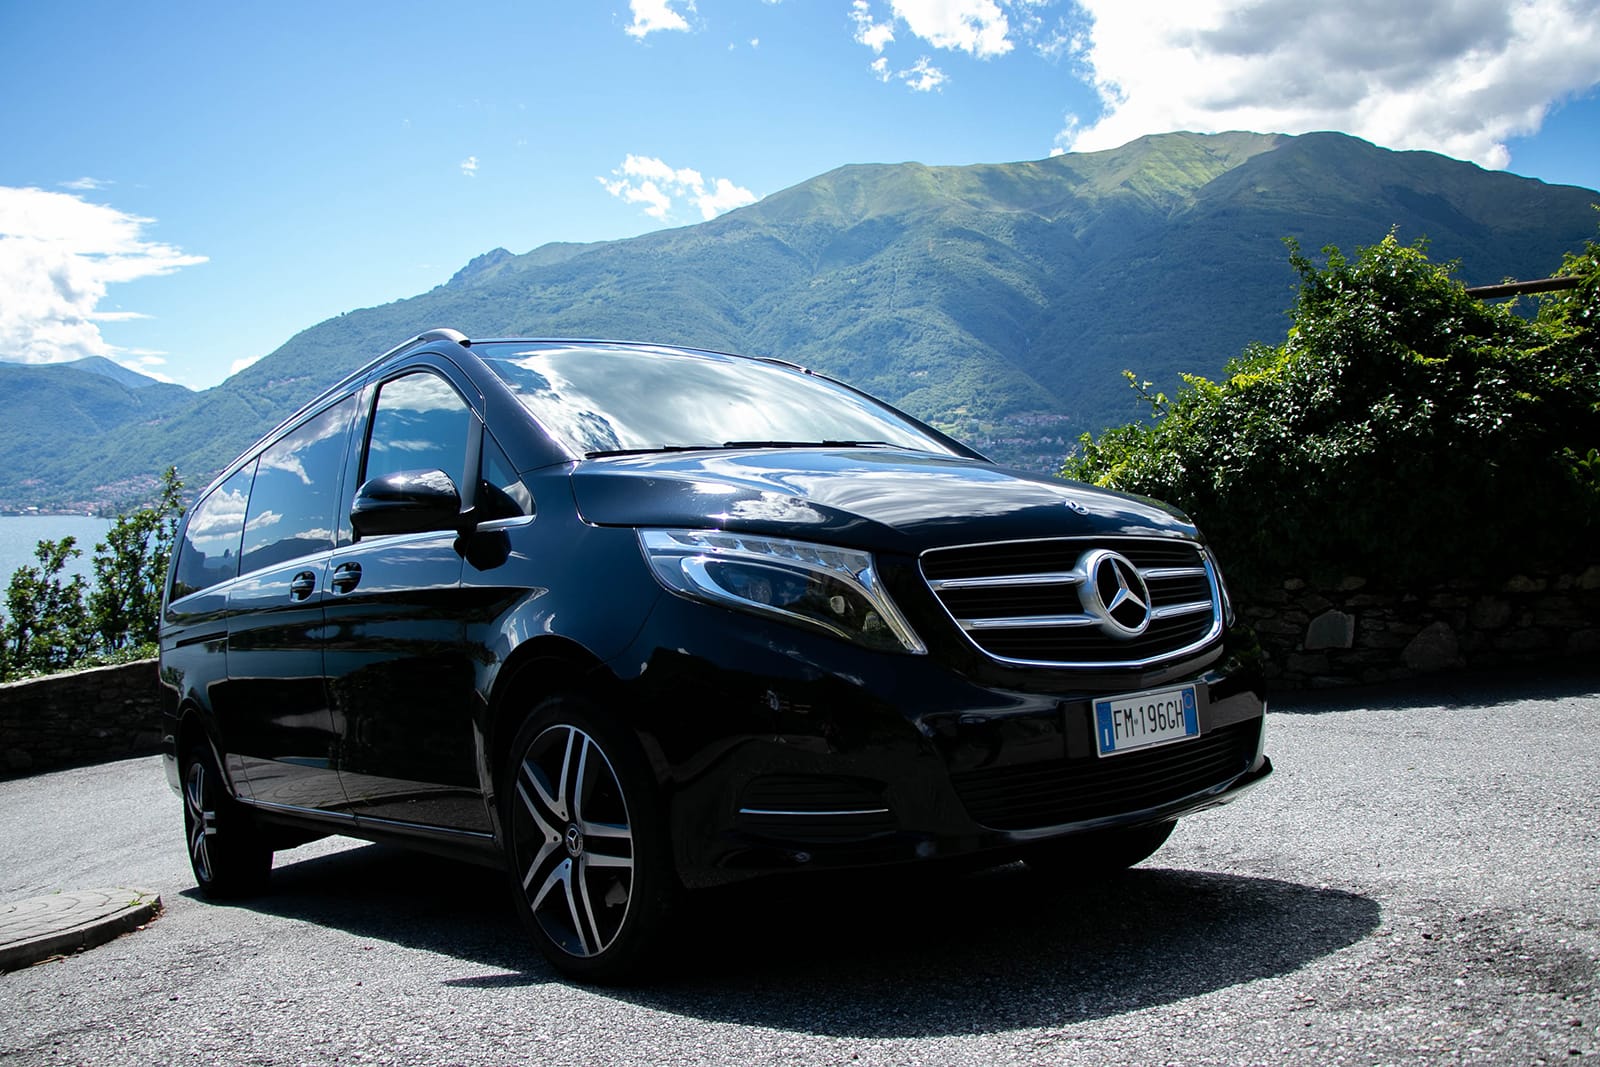 ddrive taxy rent  car Italy tour luxury